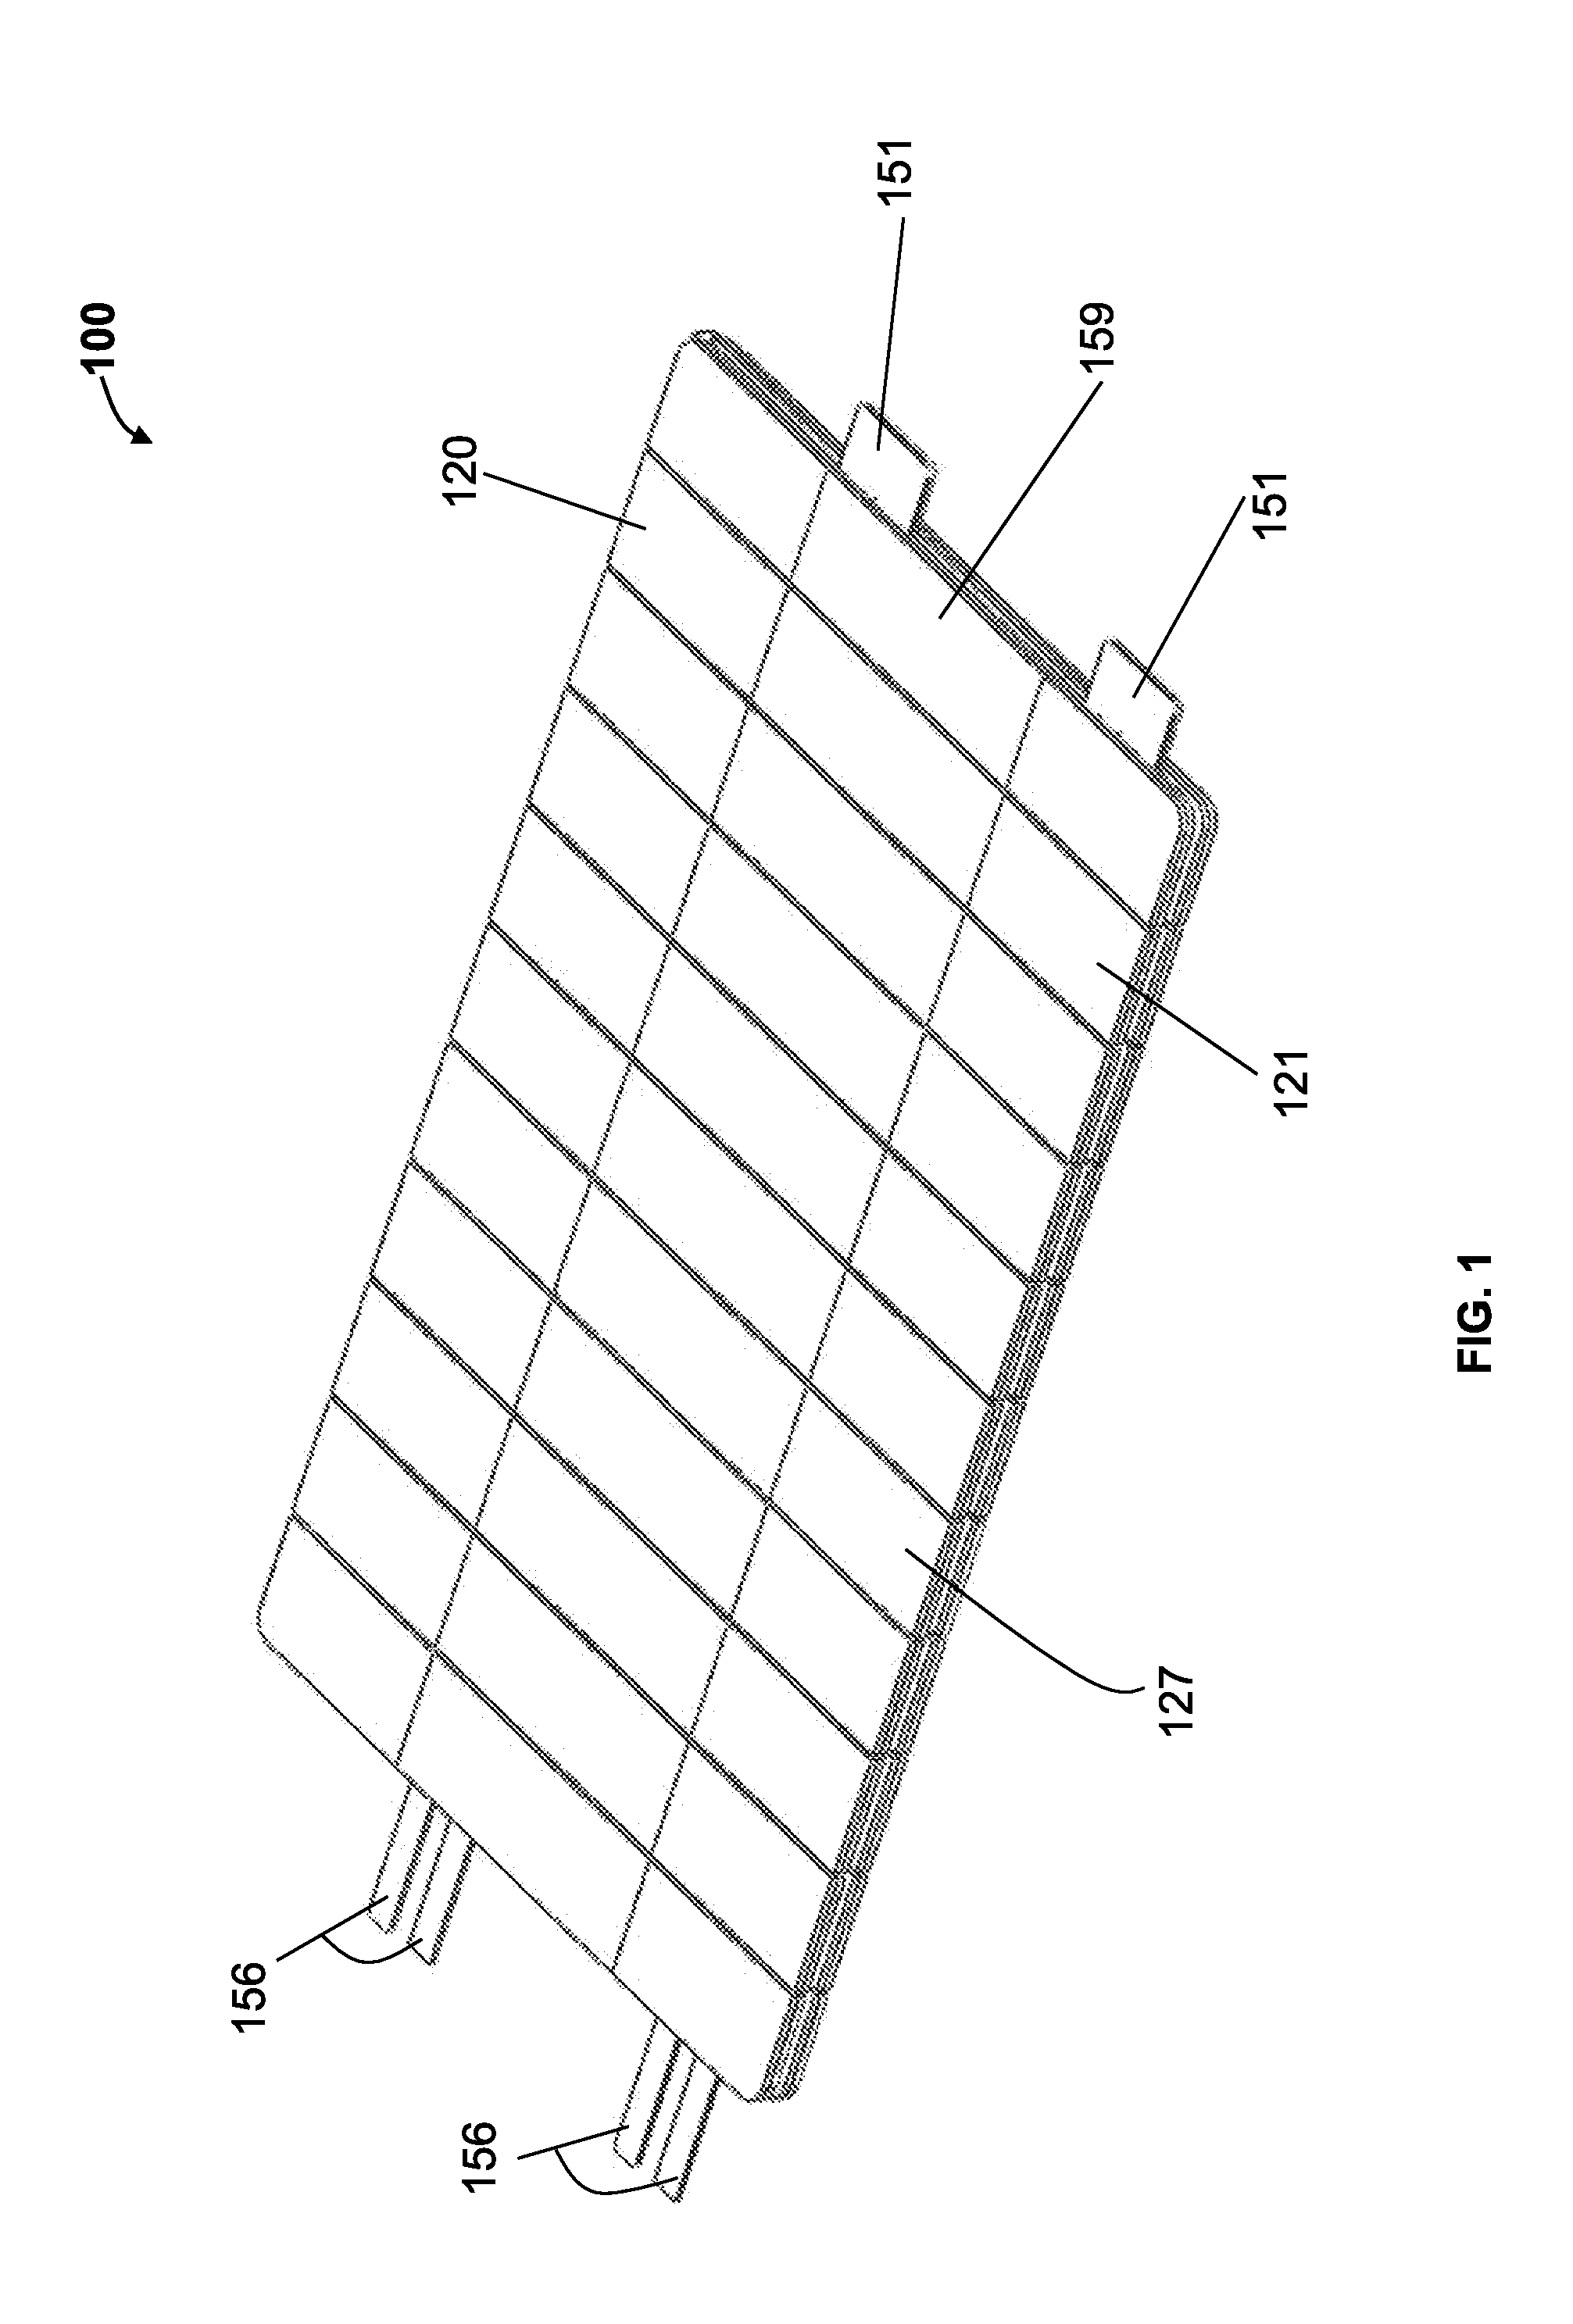 Wound or skin treatment devices and methods